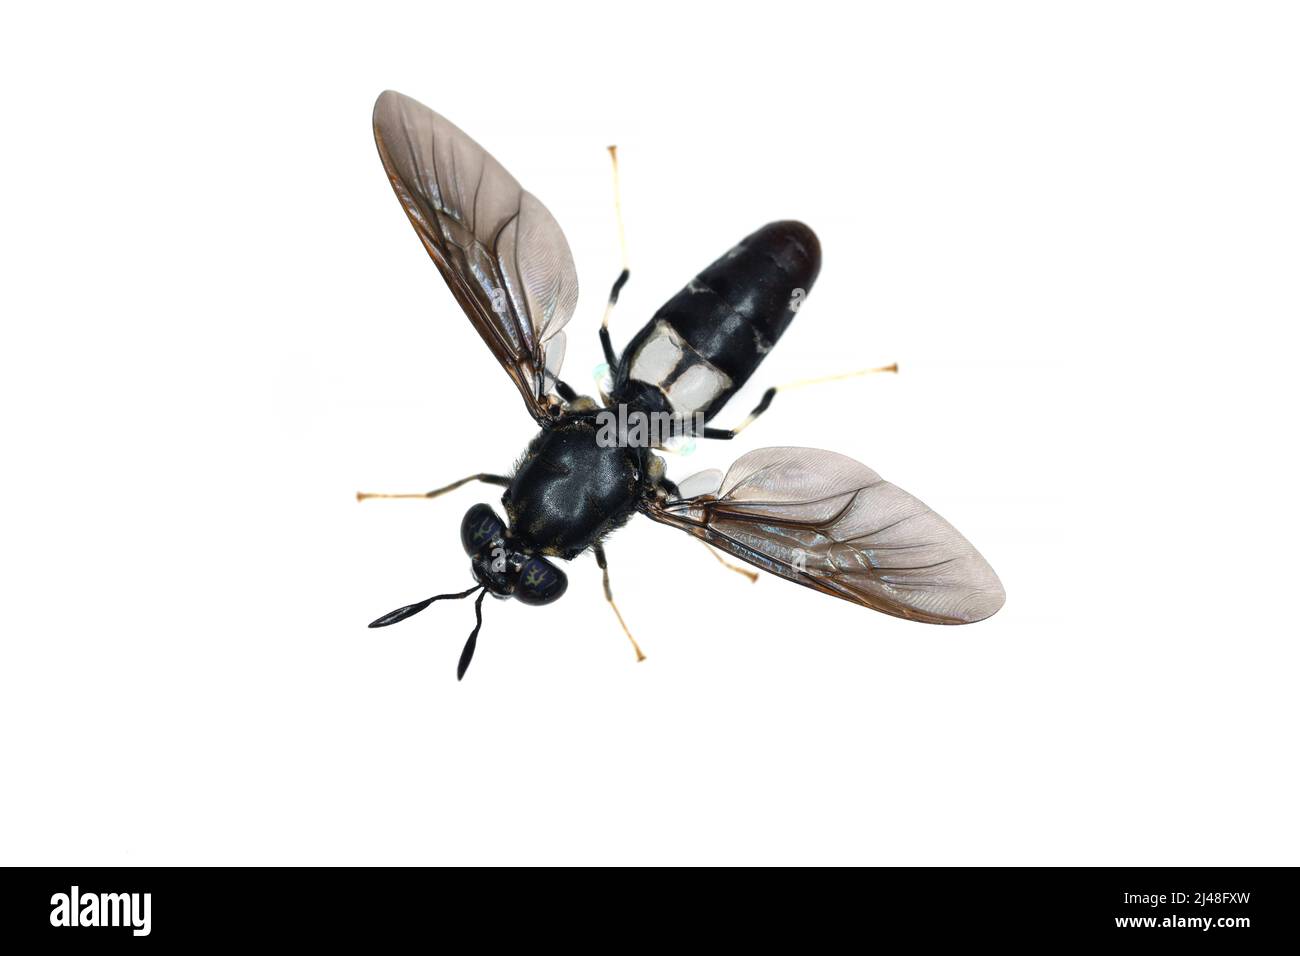 Black soldier fly species Hermetia illucens in high definition with extreme focus. Isolated on white background. Stock Photo